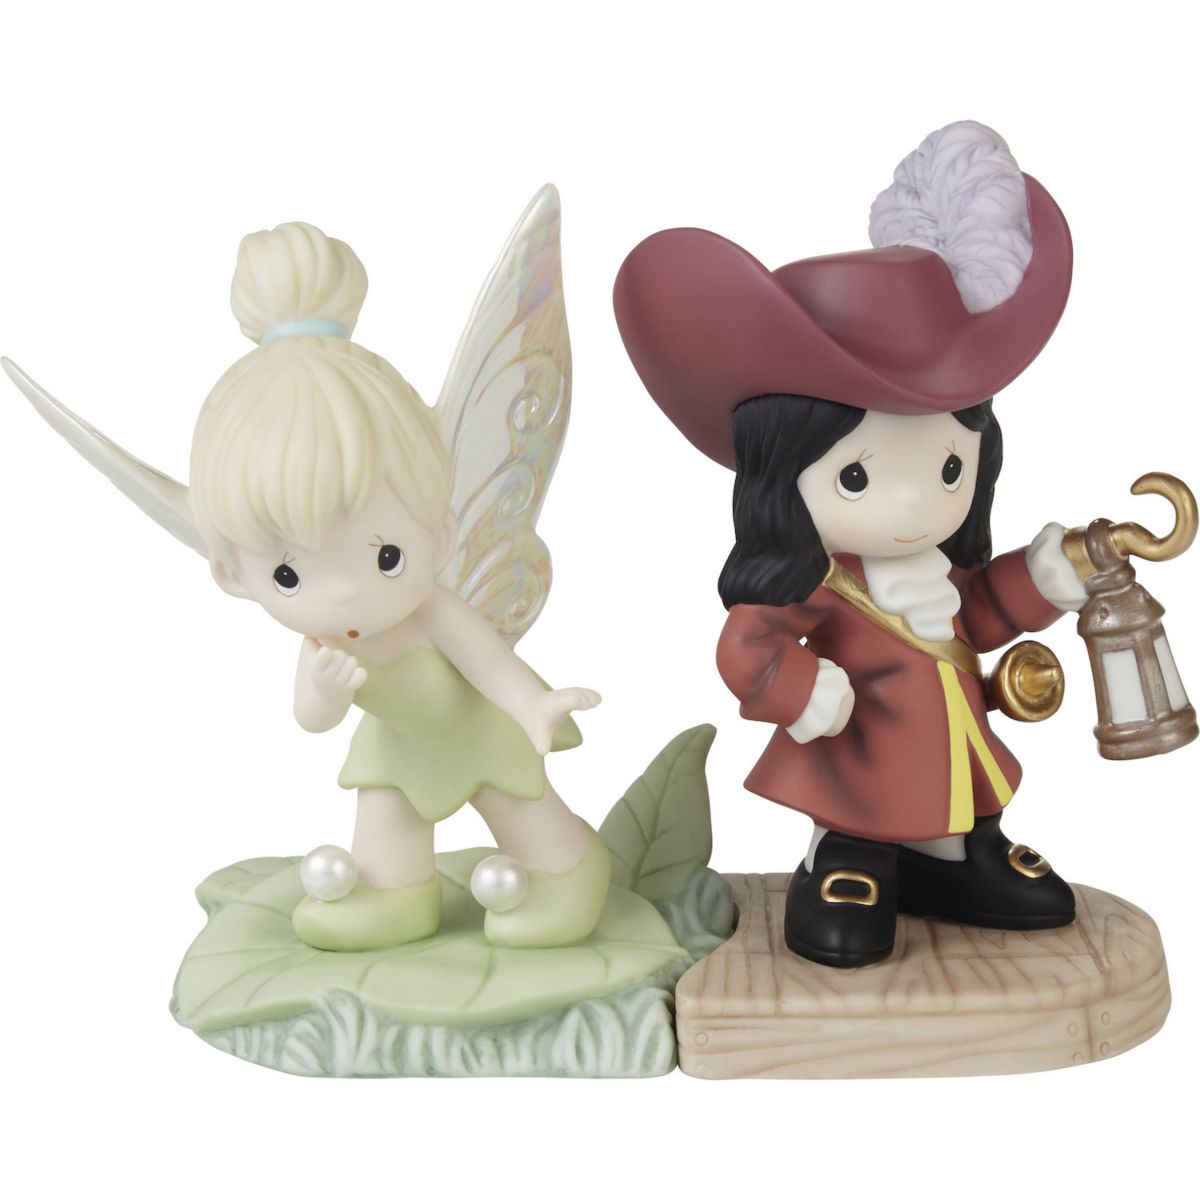 Disney's Peter Pan Tinker Bell & Captain Hook Life Is A Daring Adventure Figurine Table Decor 2-piece Set by Precious Moments Precious Moments